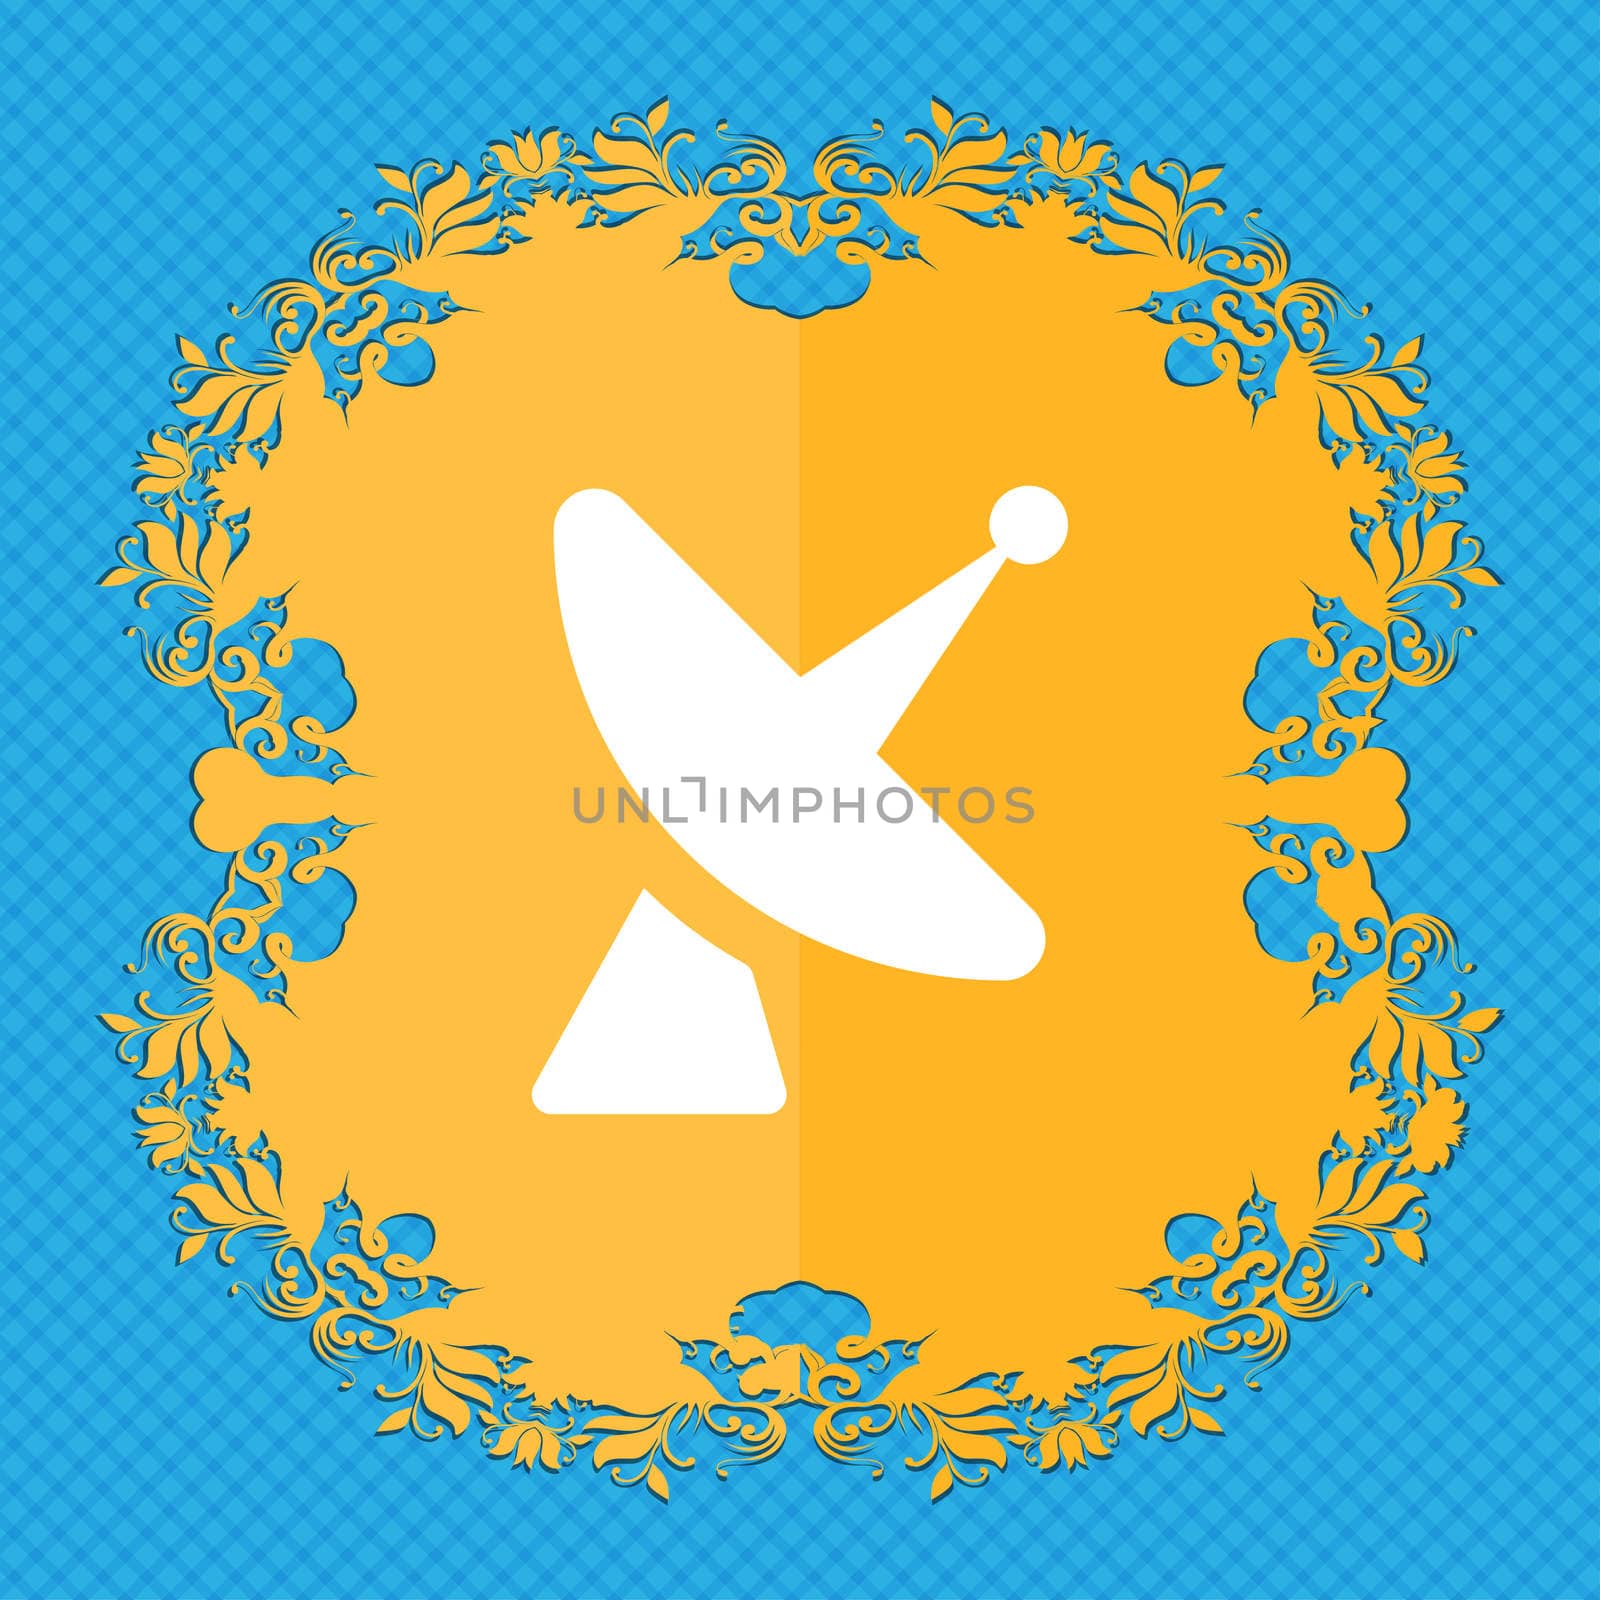 Satellite dish . Floral flat design on a blue abstract background with place for your text. illustration